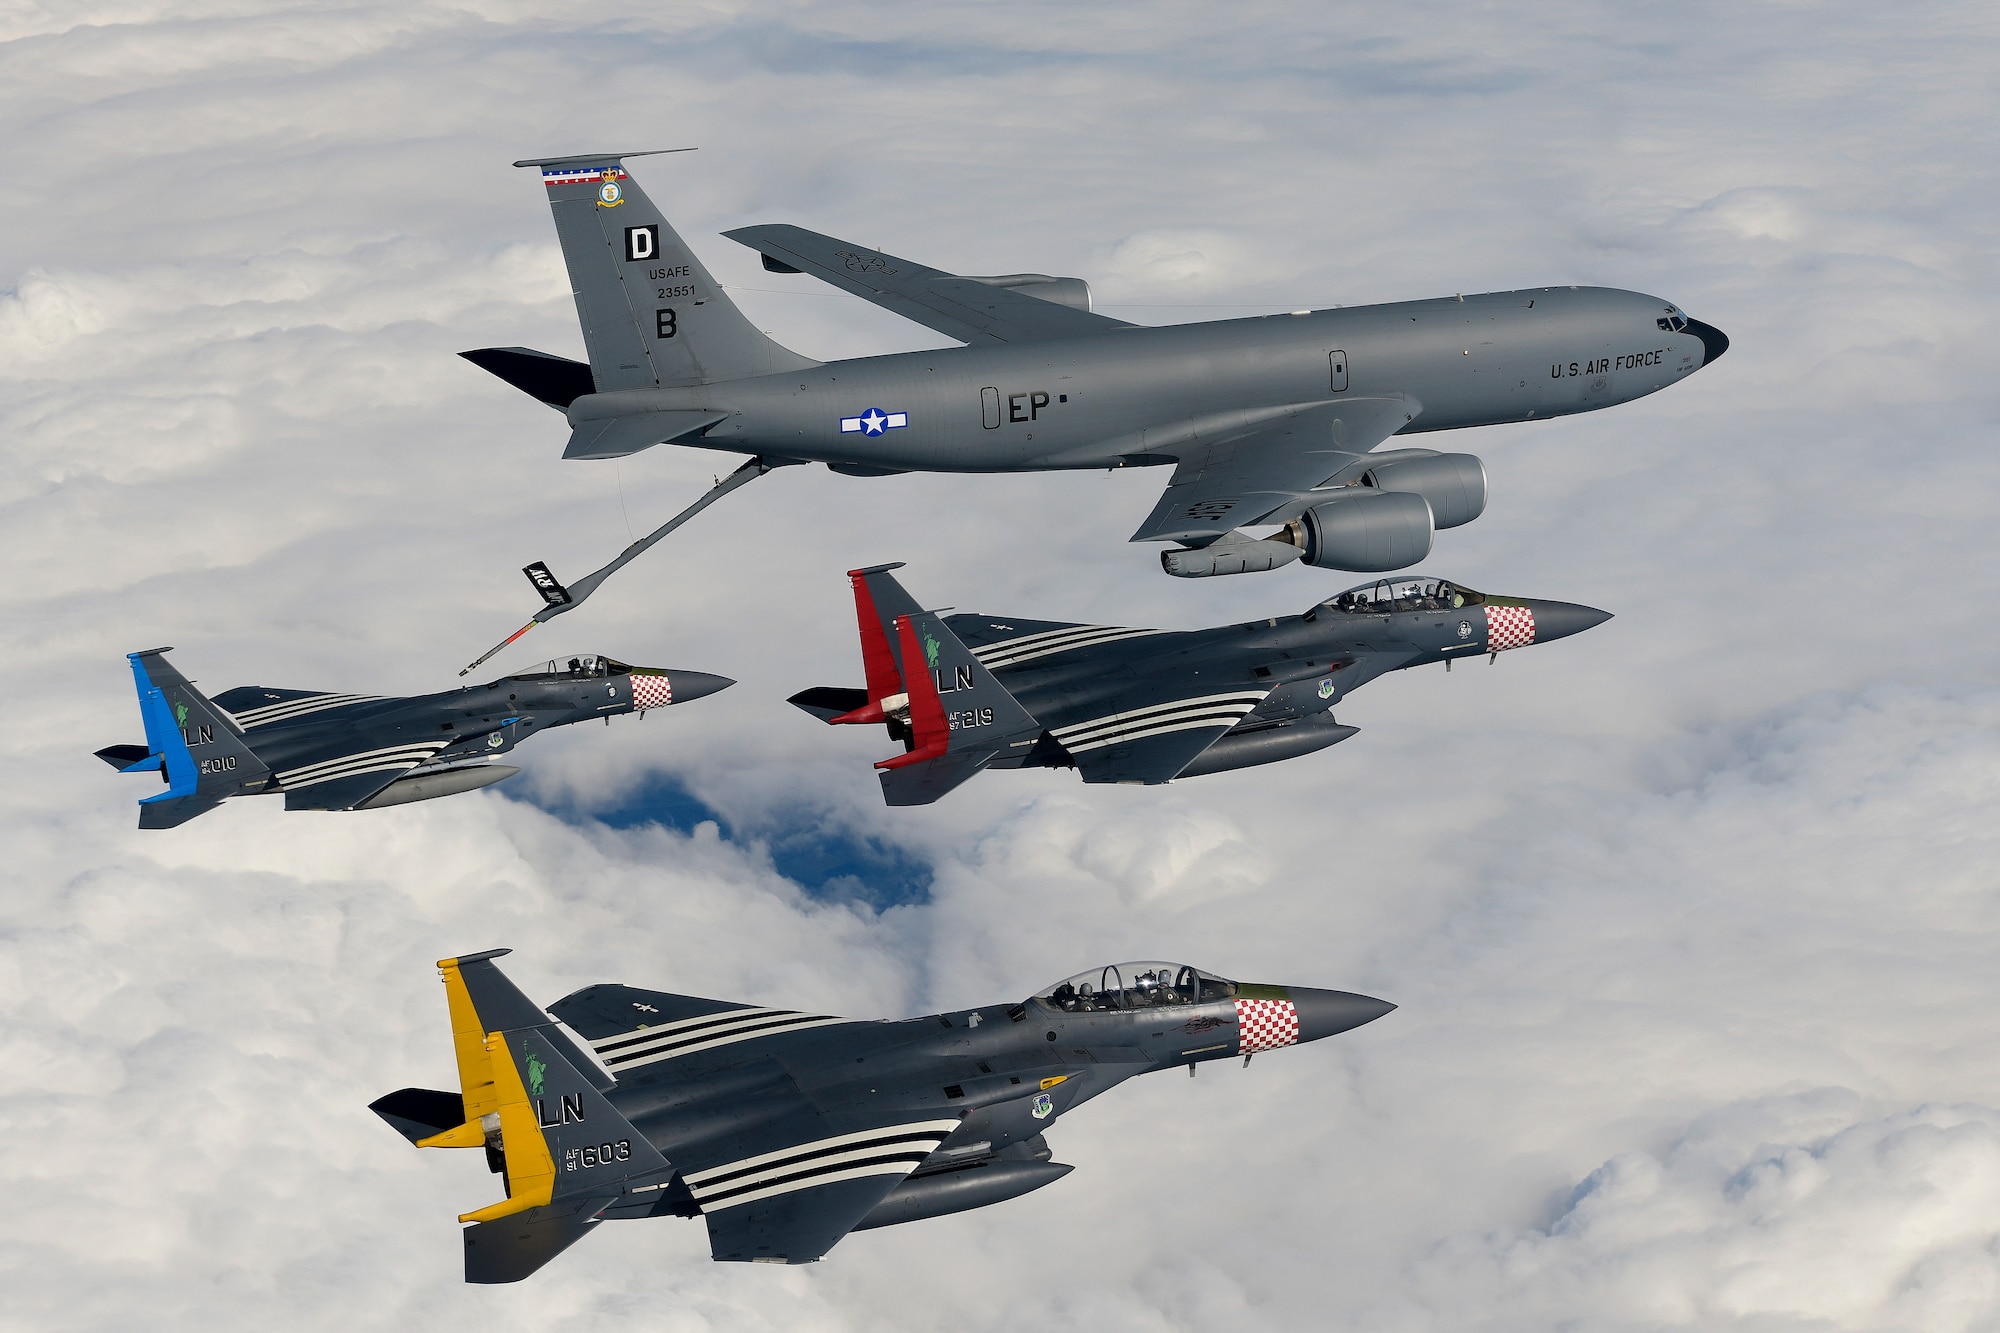 An F-15C Eagle and two F-15E Strike Eagles assigned to the 48th Fighter Wing, RAF Lakenheath, United Kingdom, painted with their respective squadron heritage color scheme, rendezvous with a KC-135 Stratotanker assigned to the 100th Air Refuelling Wing during a flypast over the MSPO Expo in Kielce, Poland, Sept. 3, 2019. The MSPO Expo is an international defense industry exhibition. (U.S. Air Force photo by Tech. Sgt. Matthew Plew)